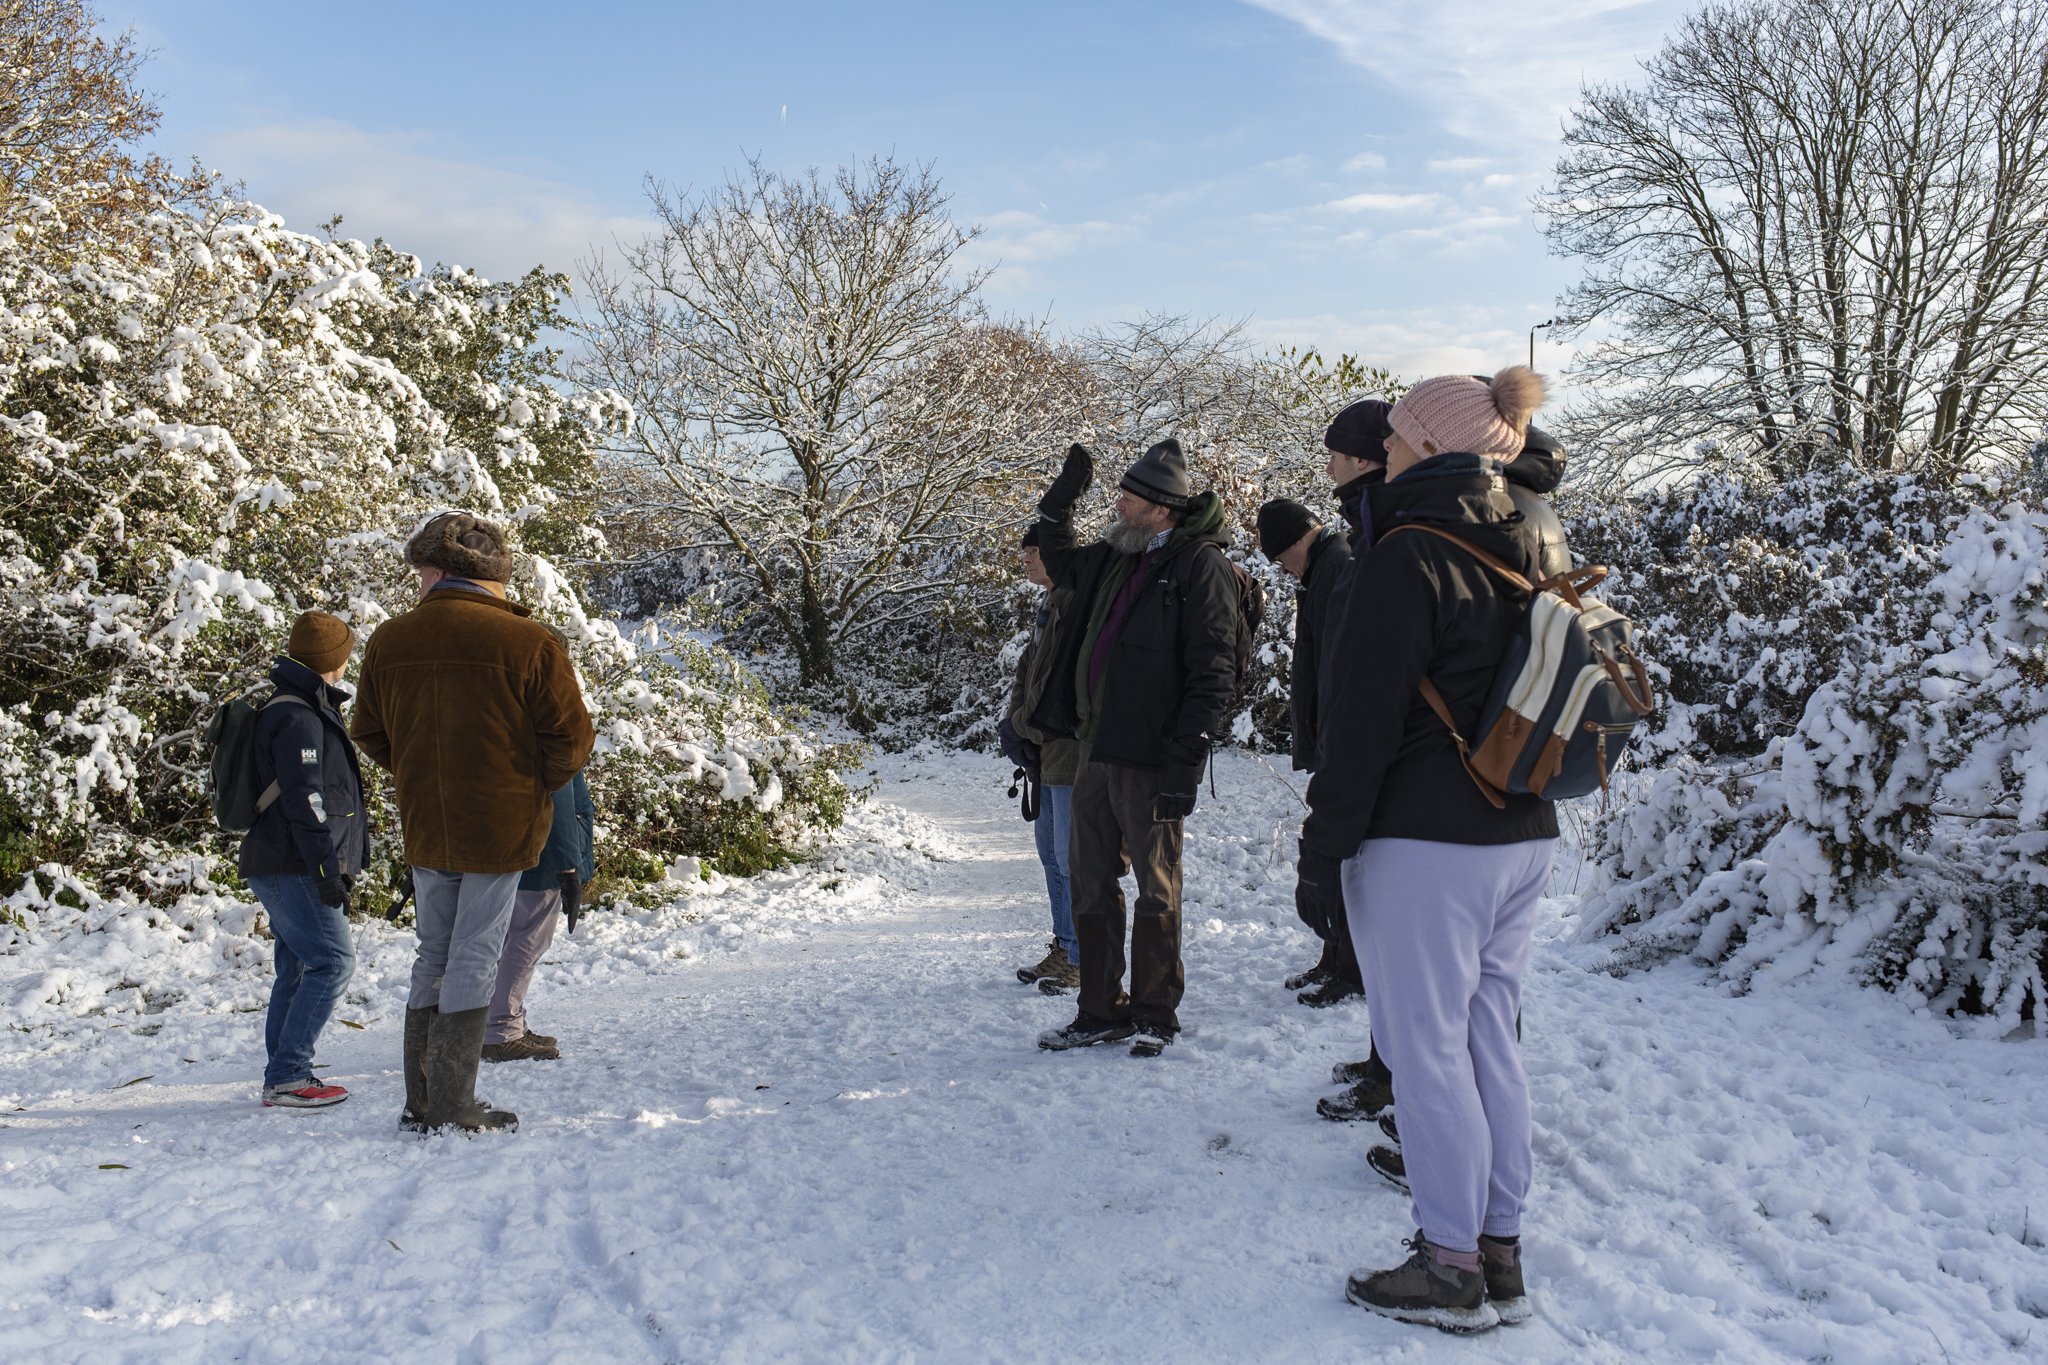 Volunteers and staff on our recent social Winter Walk 